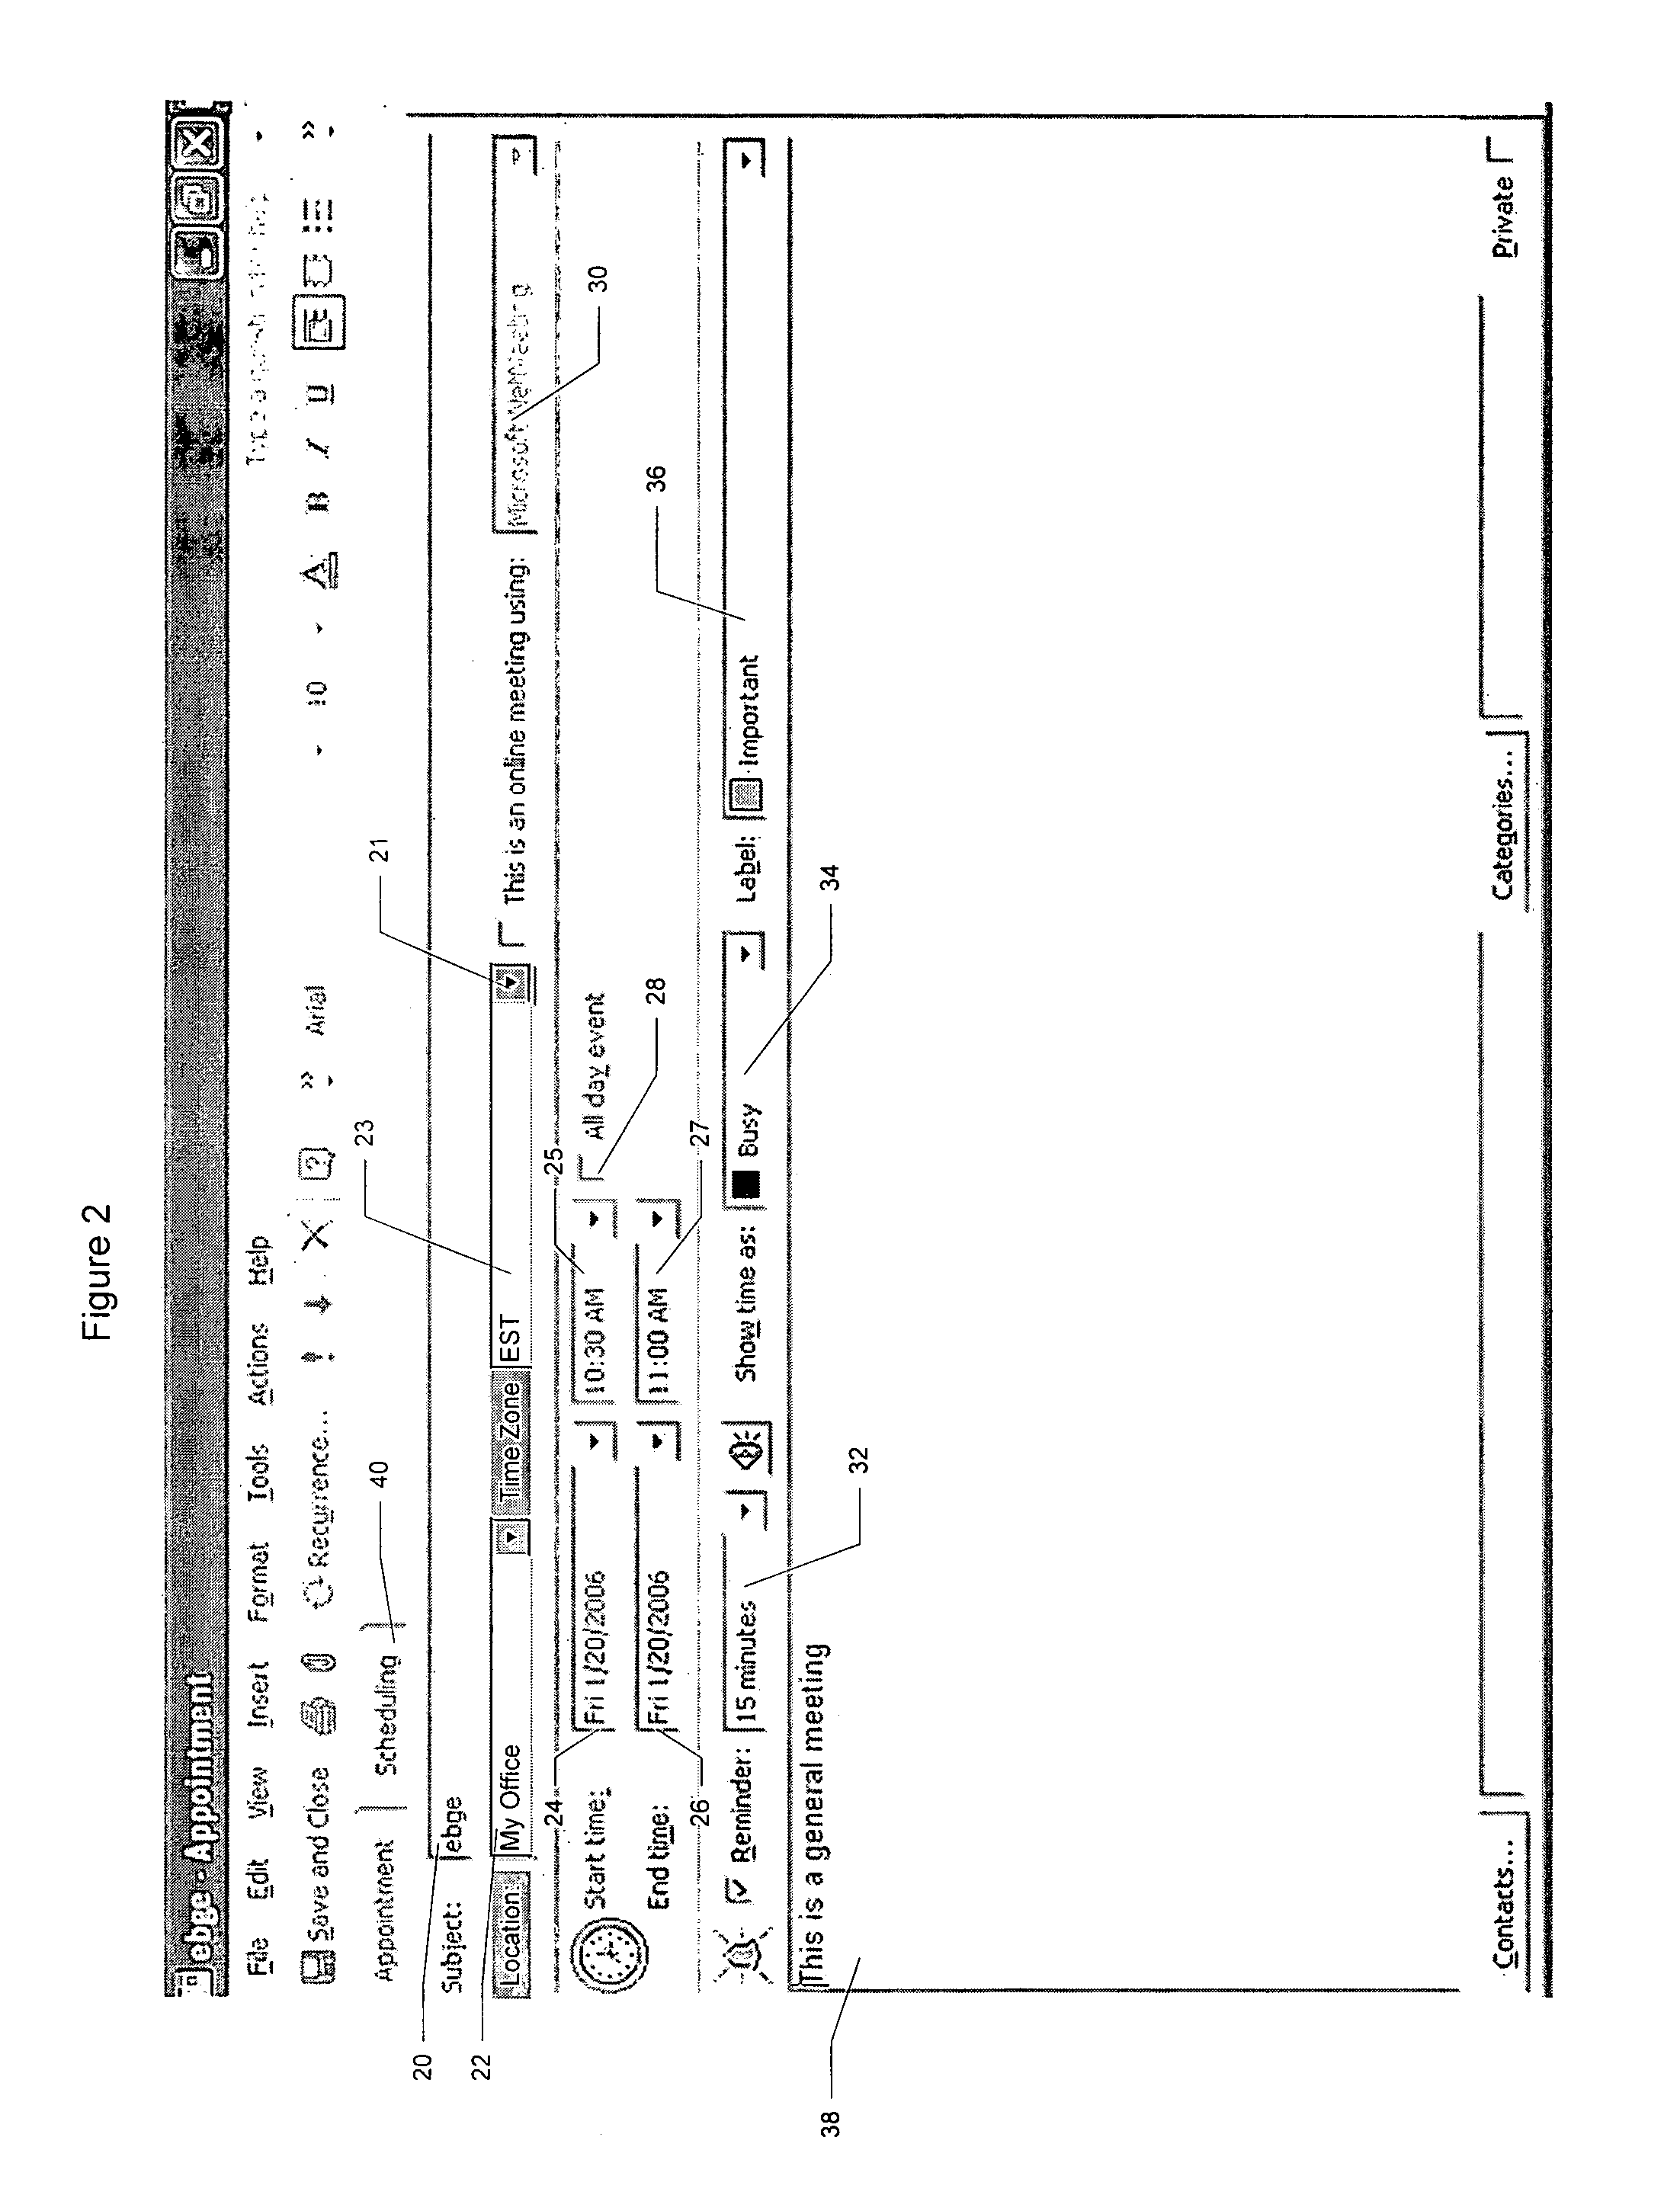 Method and apparatus for scheduling appointments for single location entries